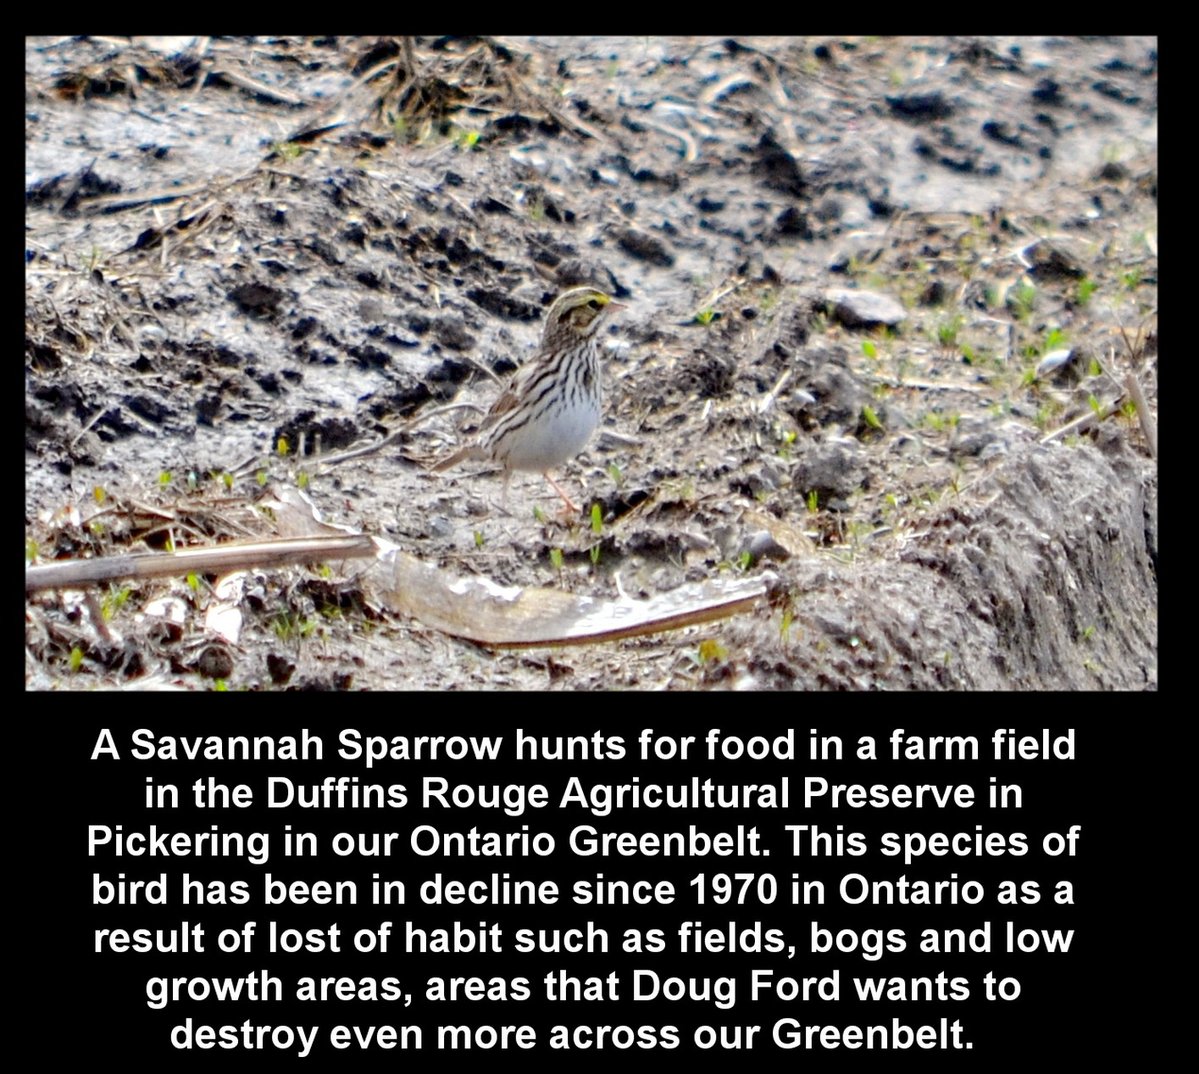 Day 511b of our pictures & the Doug Ford urban sprawl must be stopped. Let's finish this with protecting all our #Greenbelt from #Hwy413 the Bradford Bypass & save birds. #DougFordisaLiar & the #RCMP investigation continues.@Gasp4Change @envirodefence #GreenbeltScandal